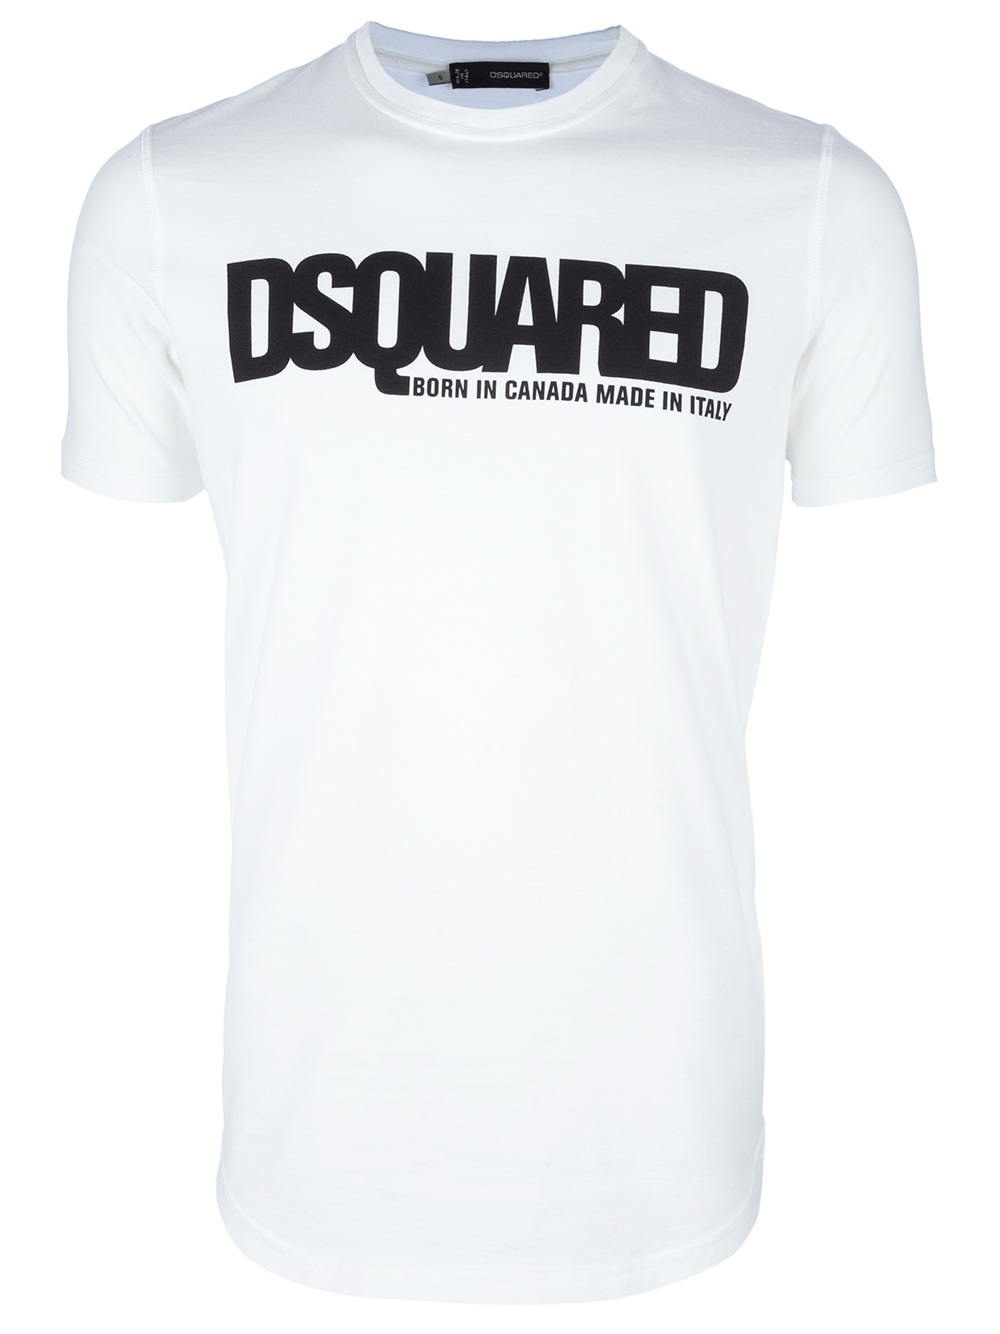 Dsquared t shirt born in canada made in italy velour homecoming